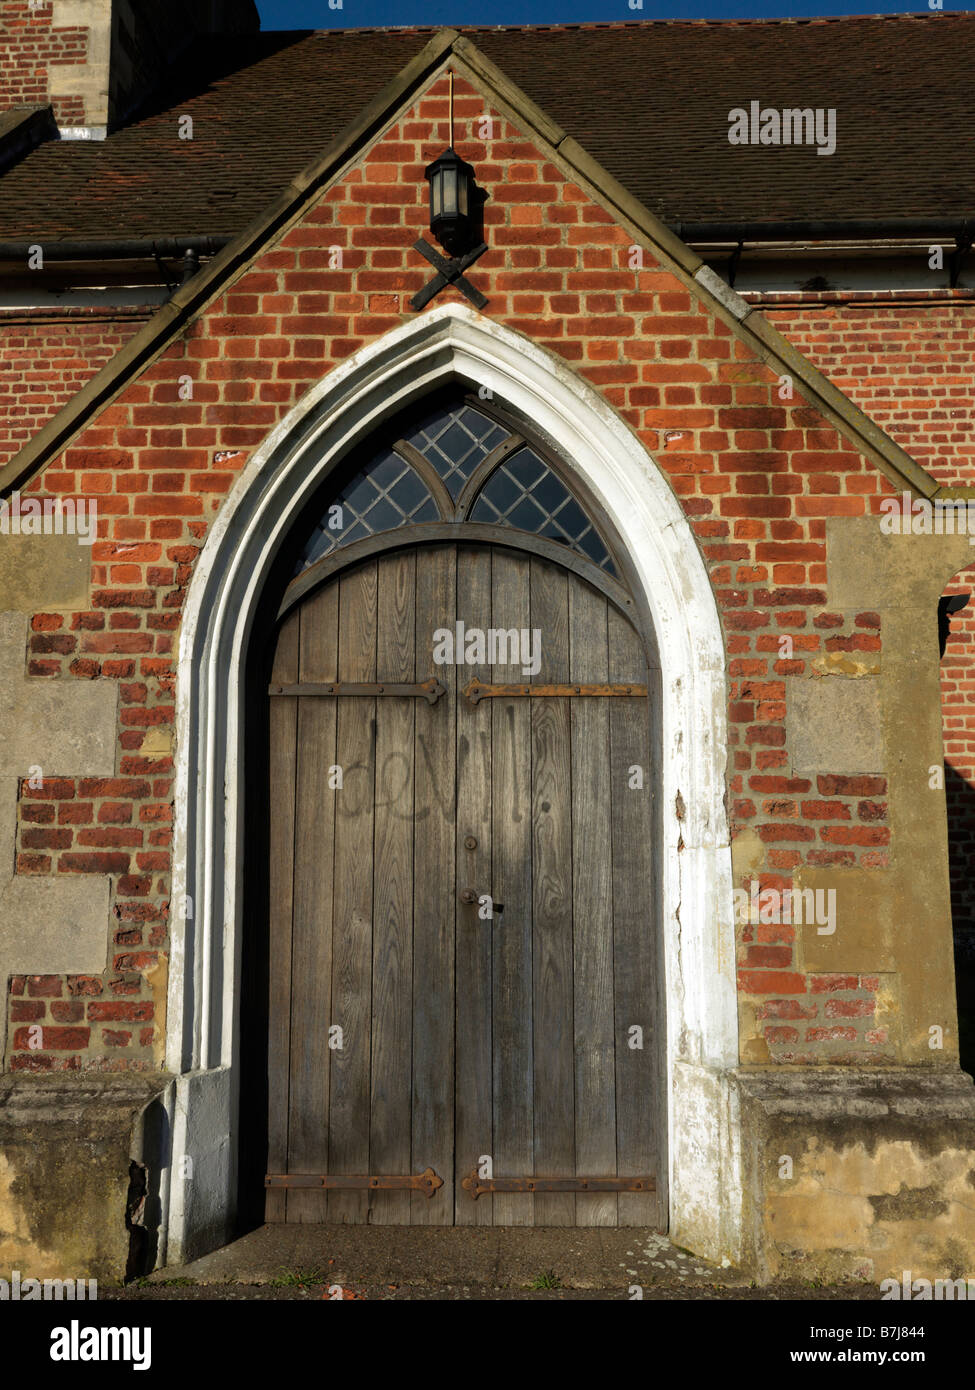 St Lawrence Church Morden Surrey England Main Entrance with graffiti Devil Written on the Door Stock Photo